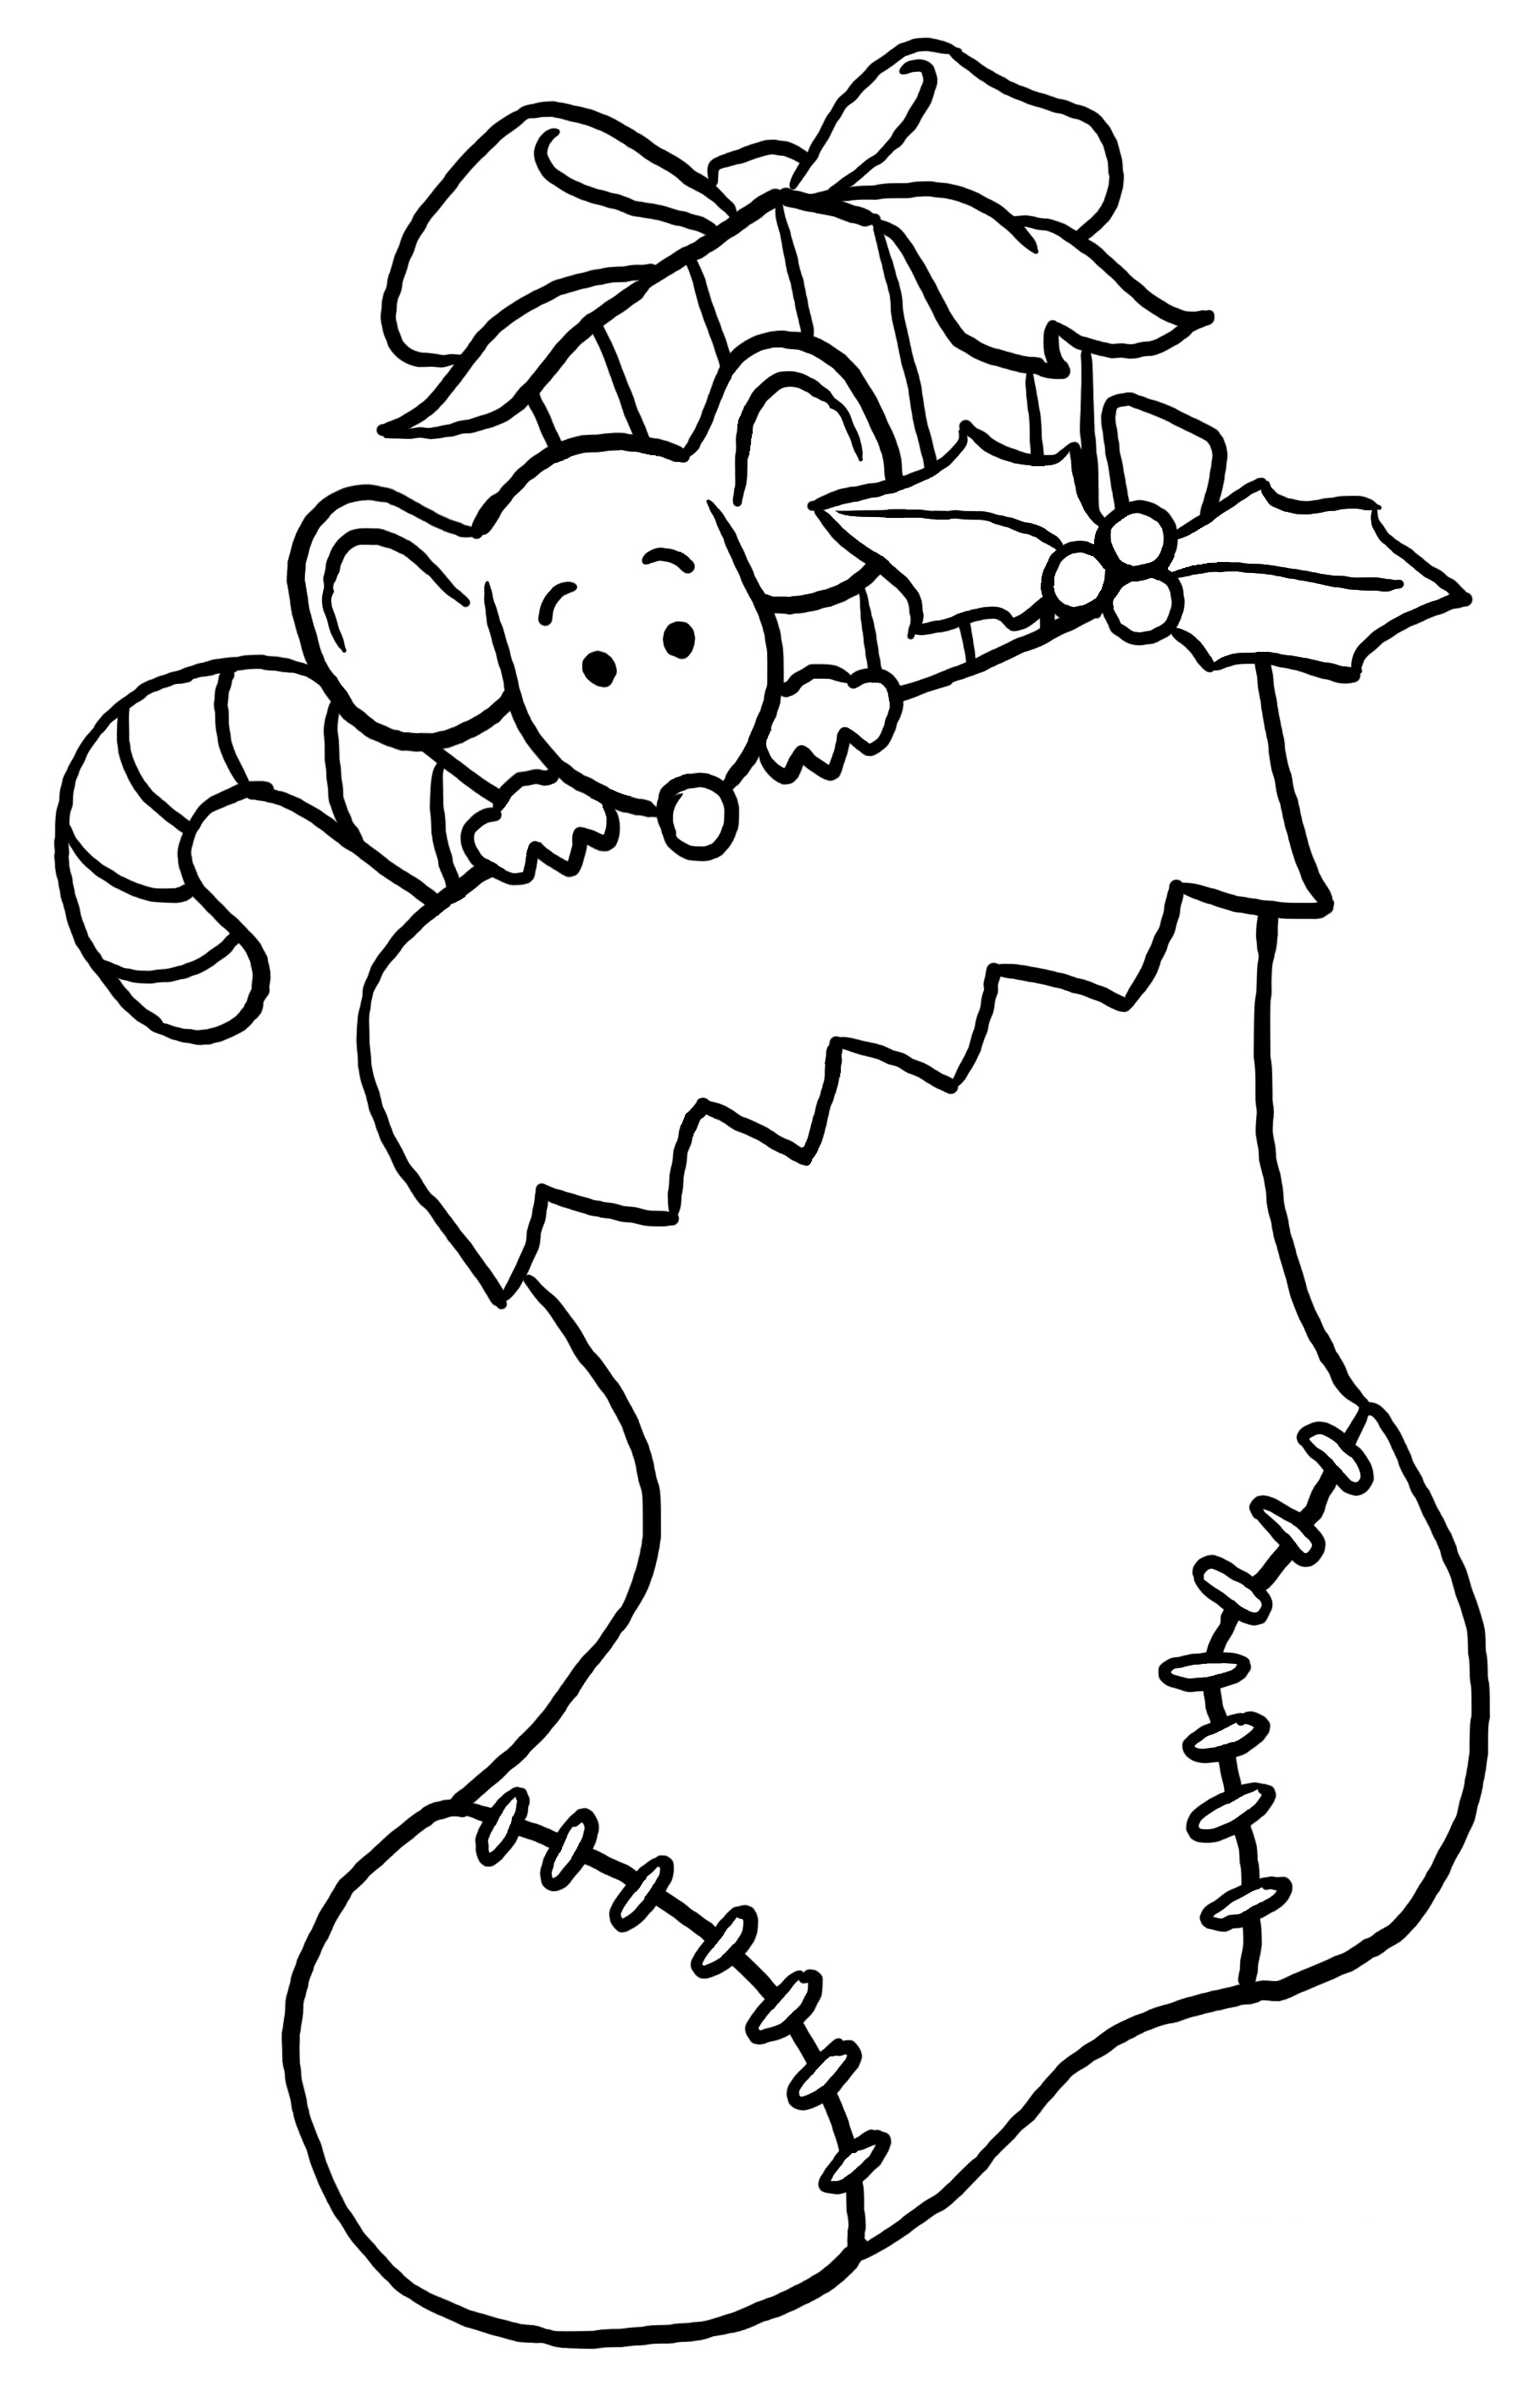 Christmas Coloring Pages Of Signs - Coloring Pages For All Ages